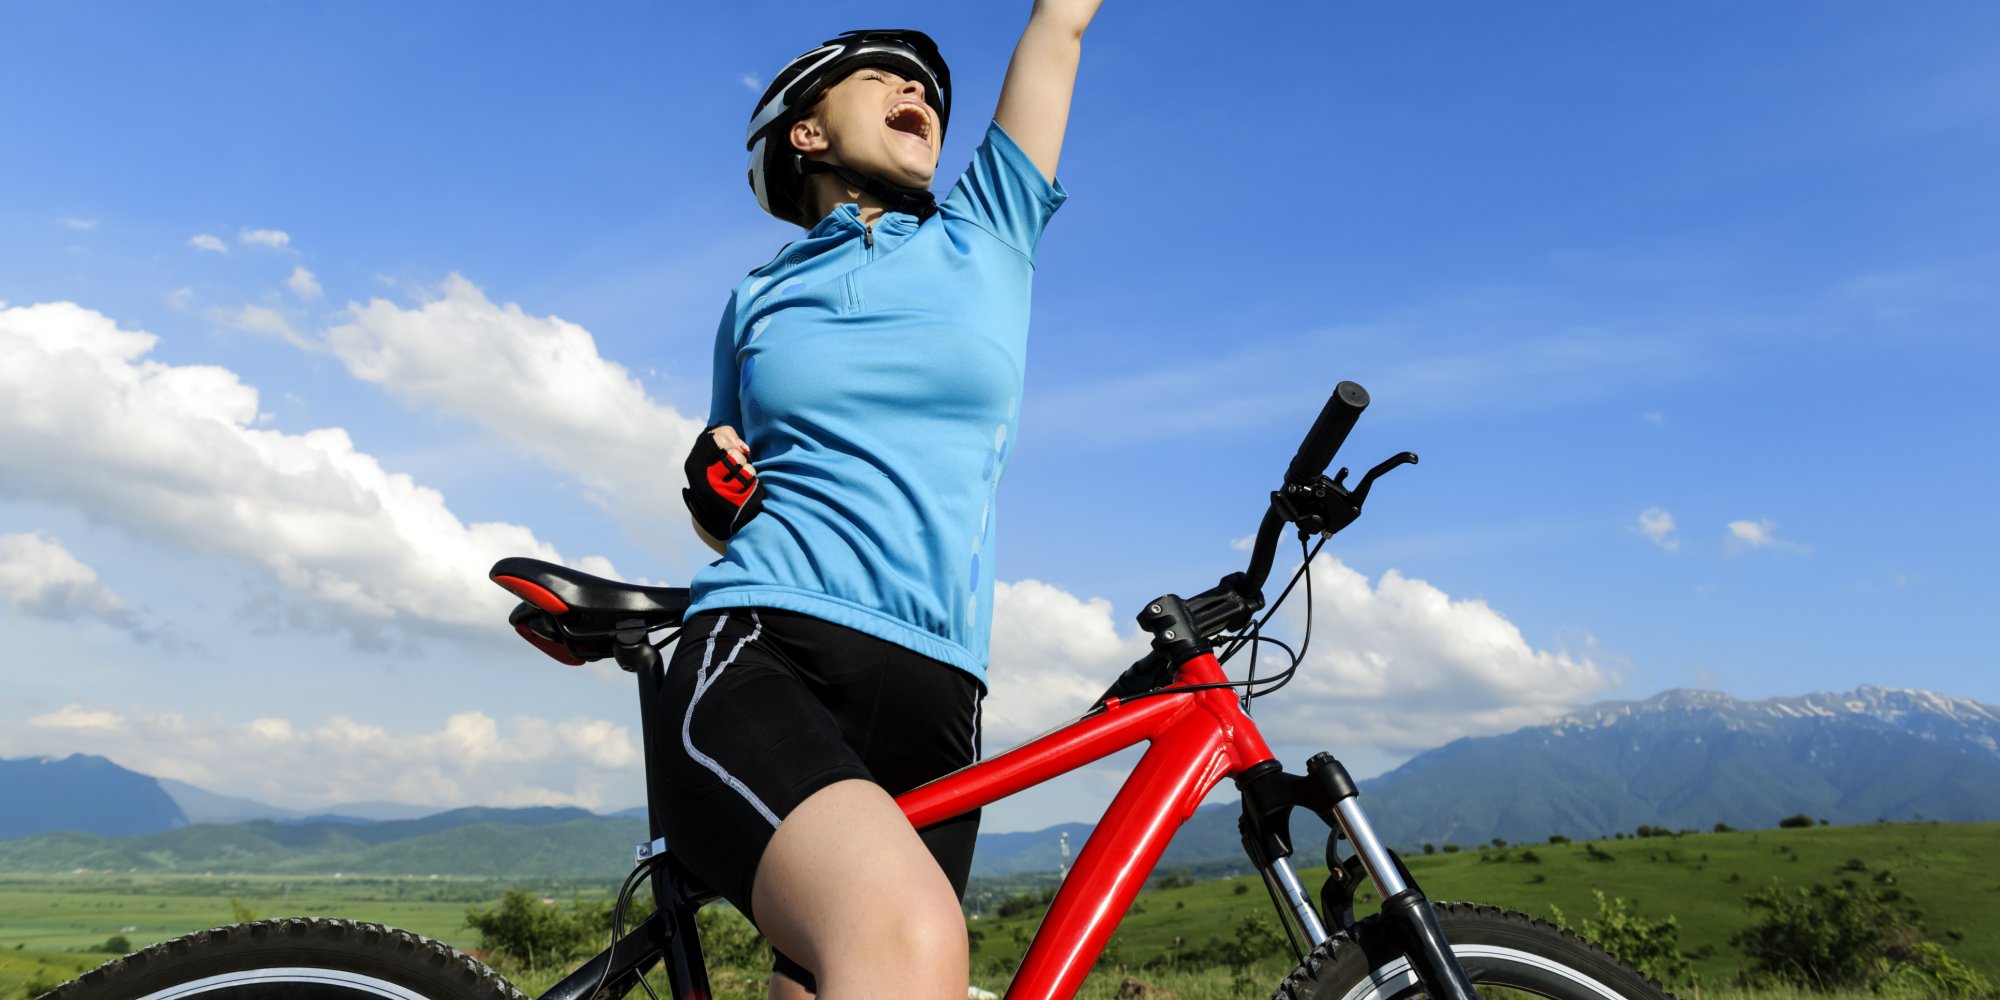 Why Riding Your Bike Makes You A Better Person According To within The Awesome  cycling shorts benefits pertaining to Invigorate